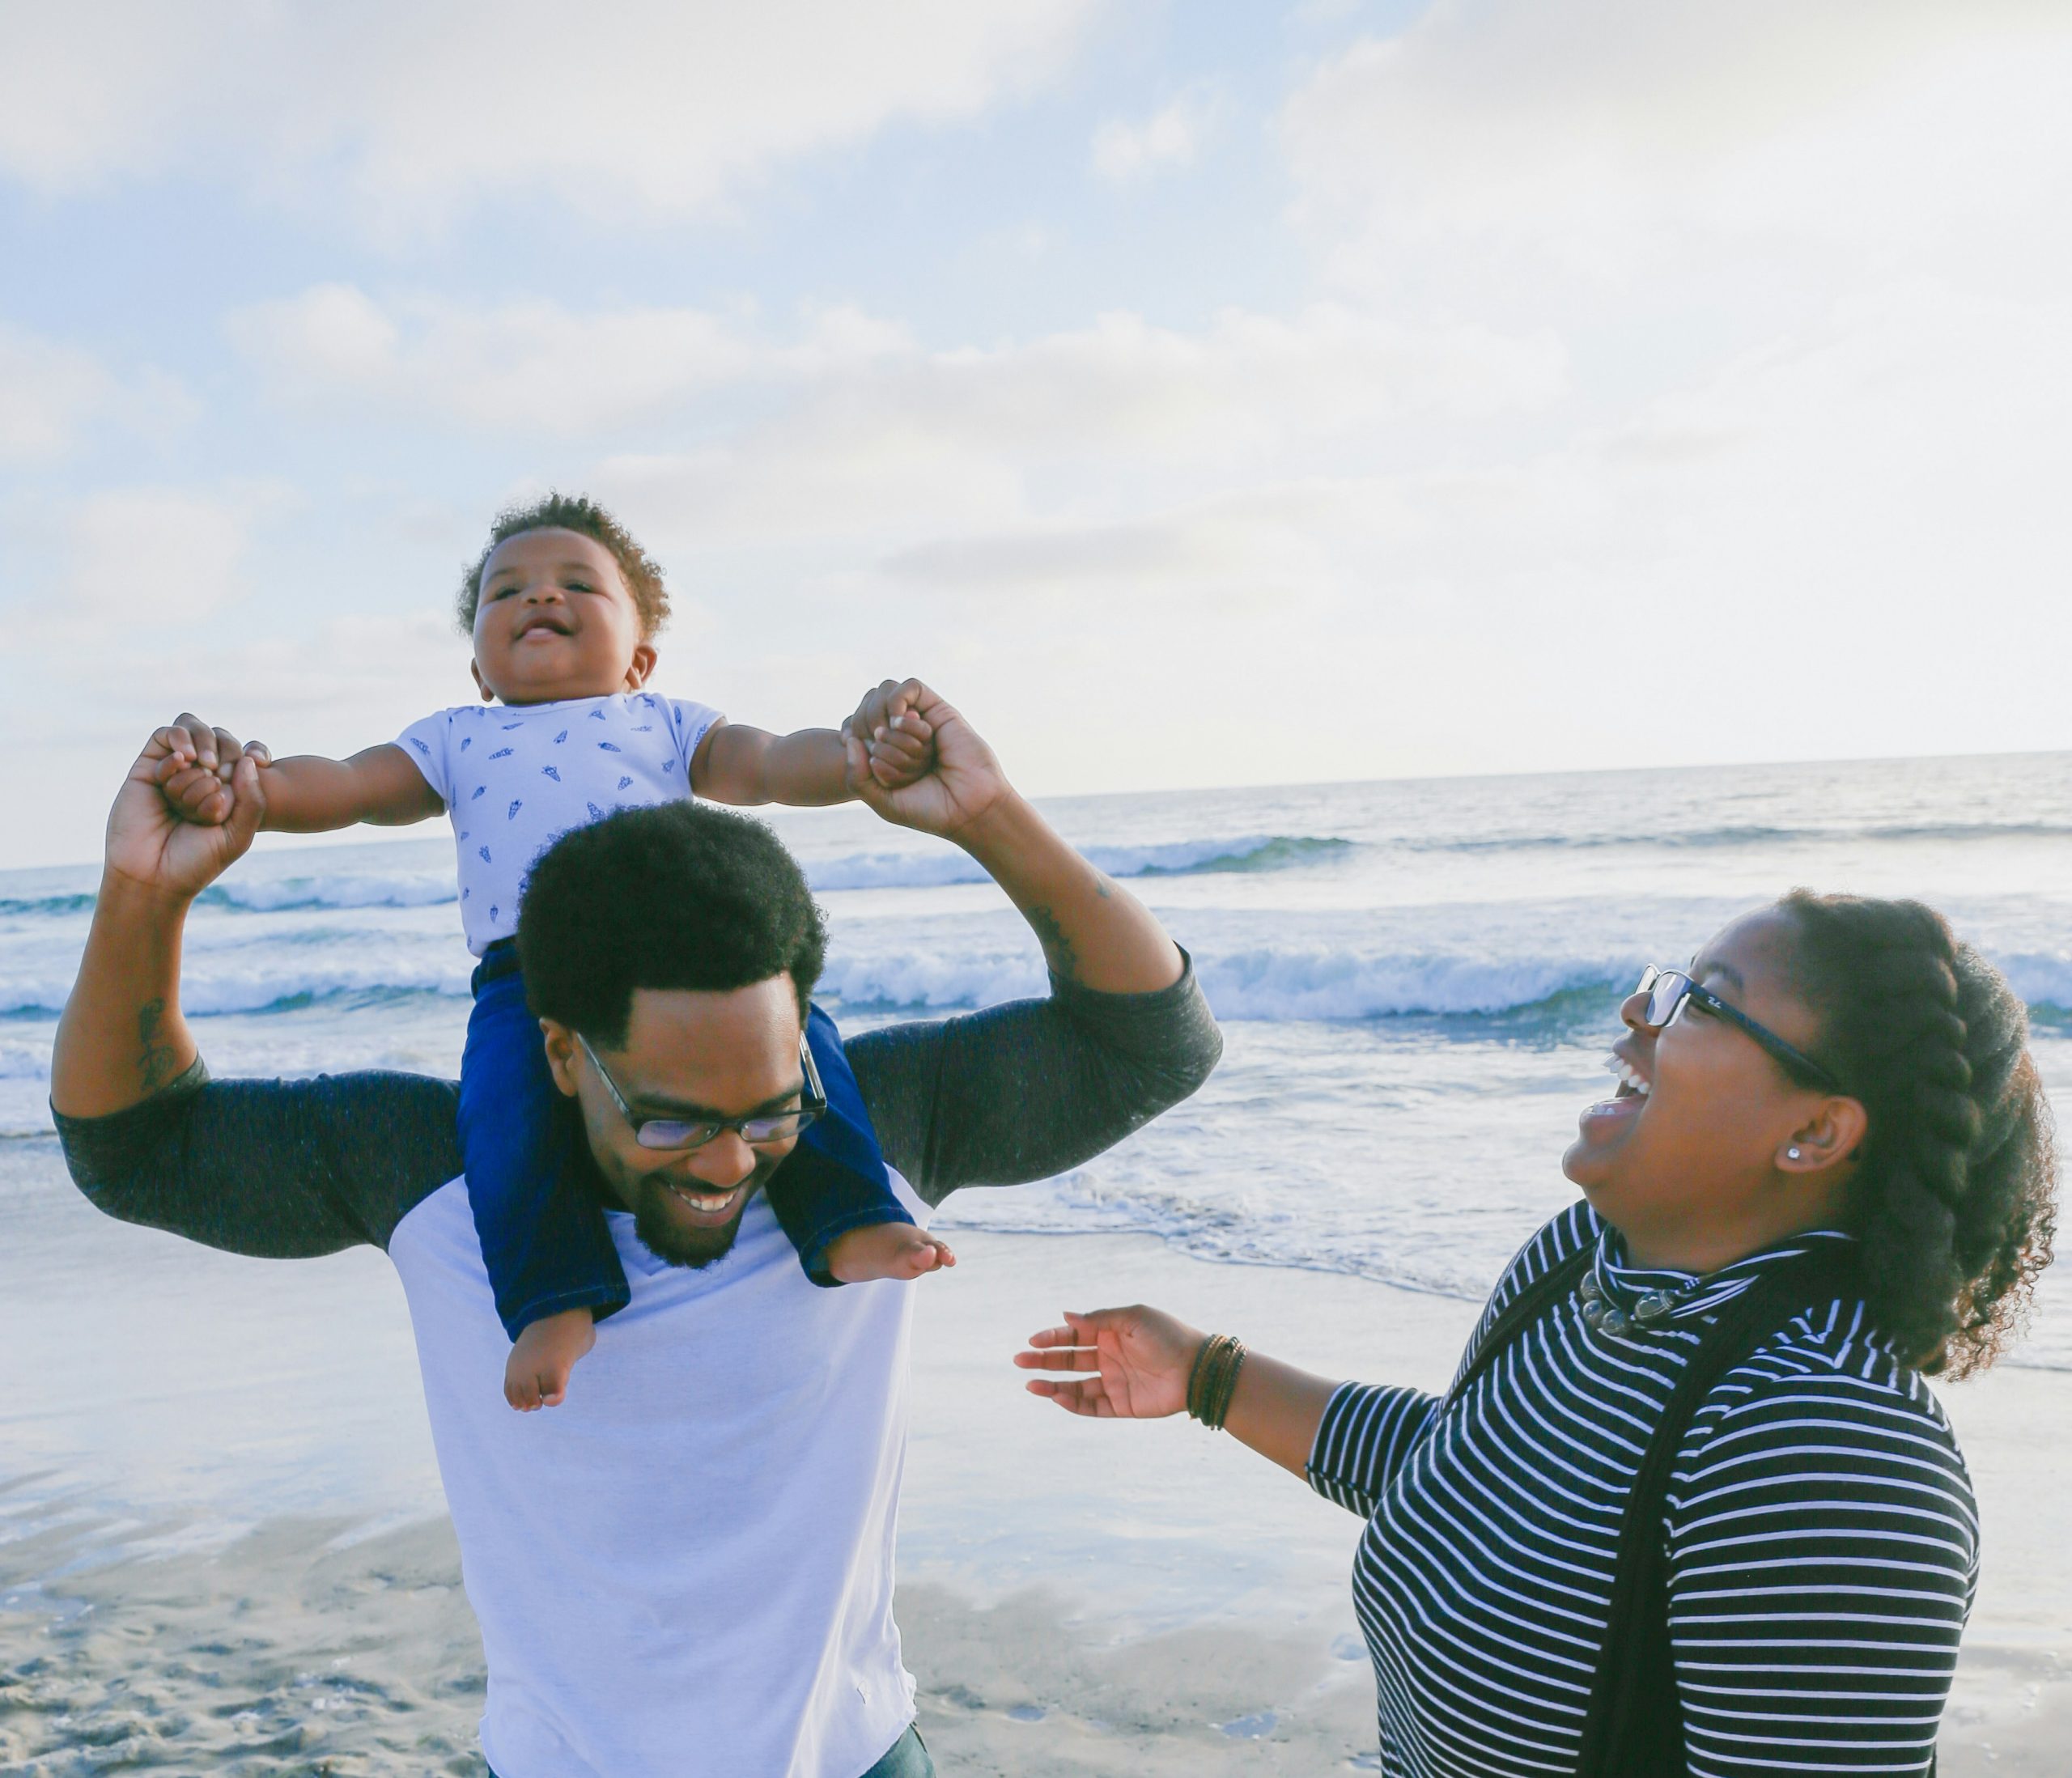 plan the perfect family vacation with our fun and relaxing destination ideas. find family-friendly activities and accommodations for an unforgettable trip.